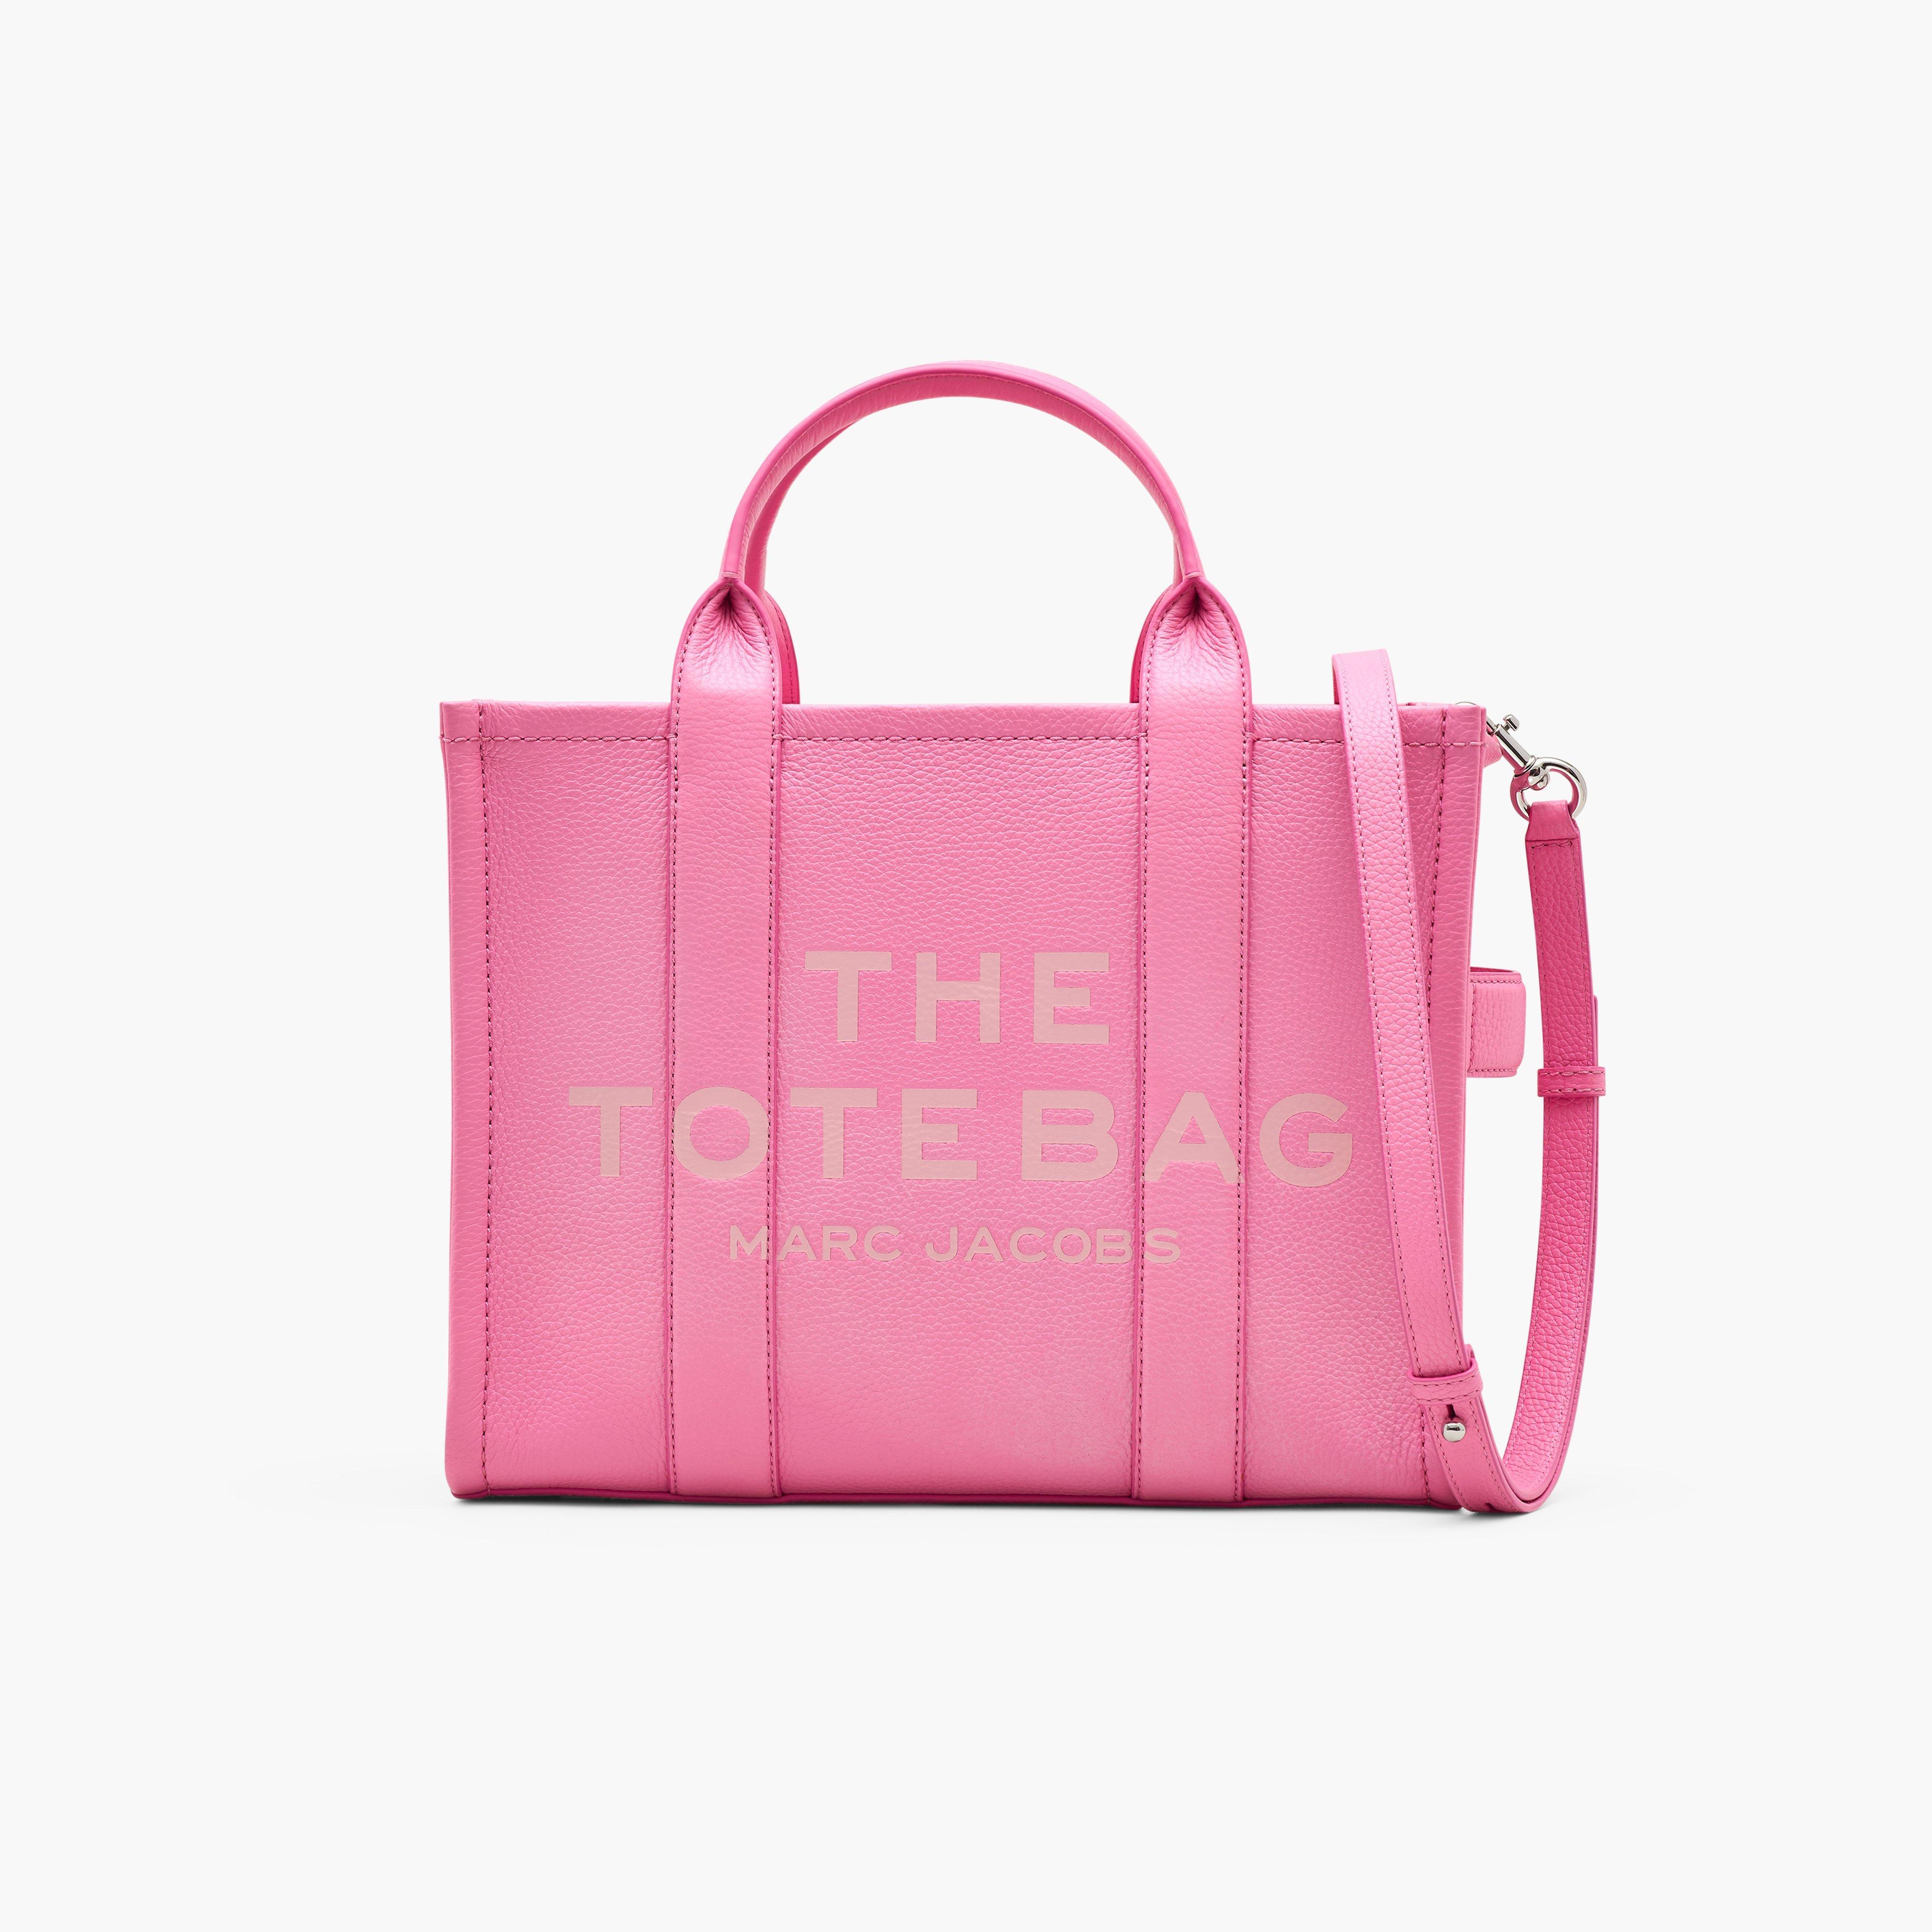 Marc by Marc jacobs The Leather Medium Tote Bag,PETAL PINK